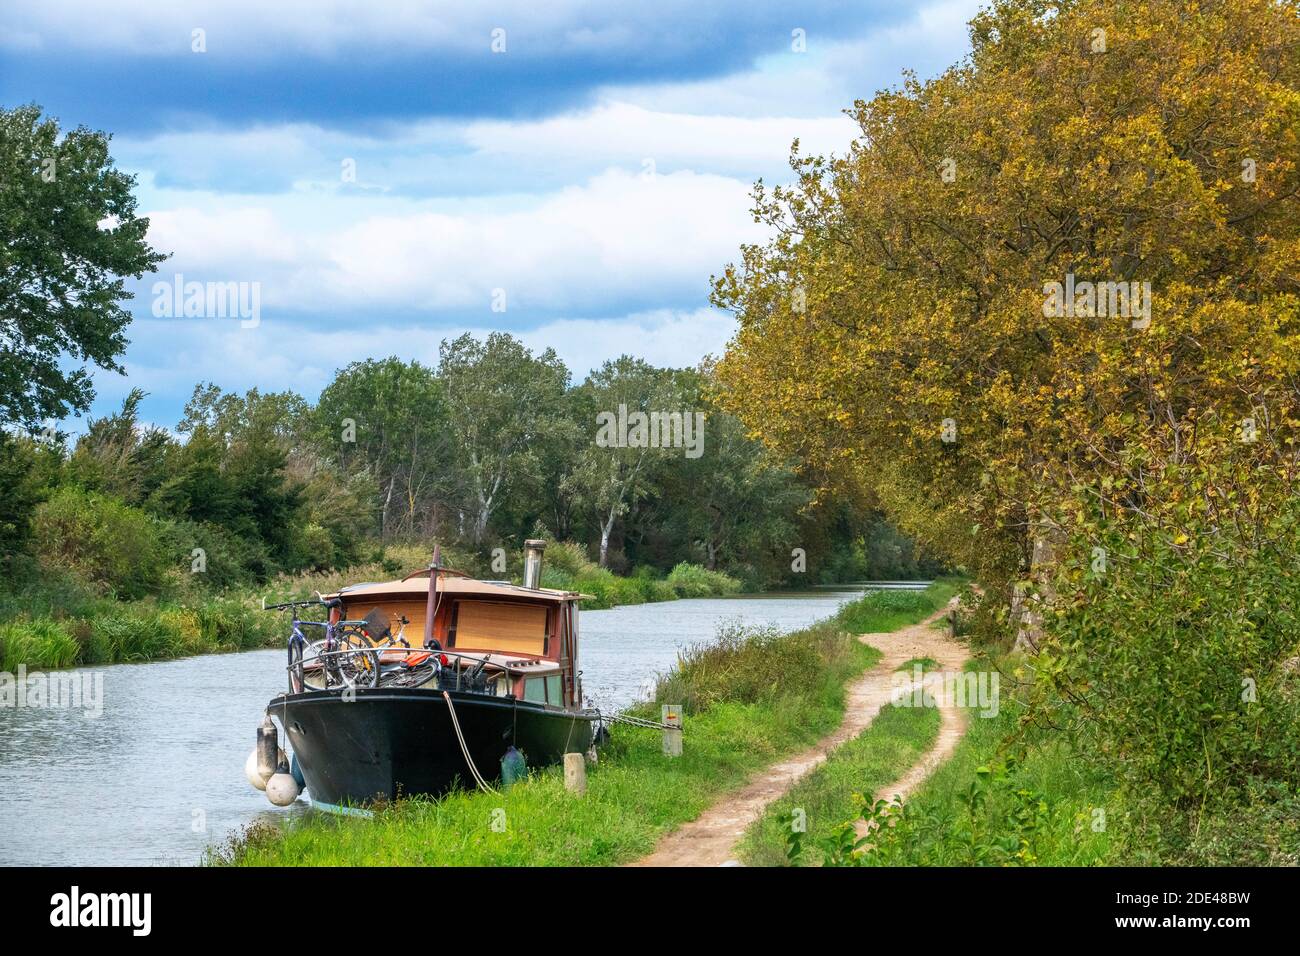 The Canal du Midi, near Carcassonne, French department of Aude, Occitanie Region, Languedoc-Rousillon France. Boats moored on the tree lined canal. Stock Photo